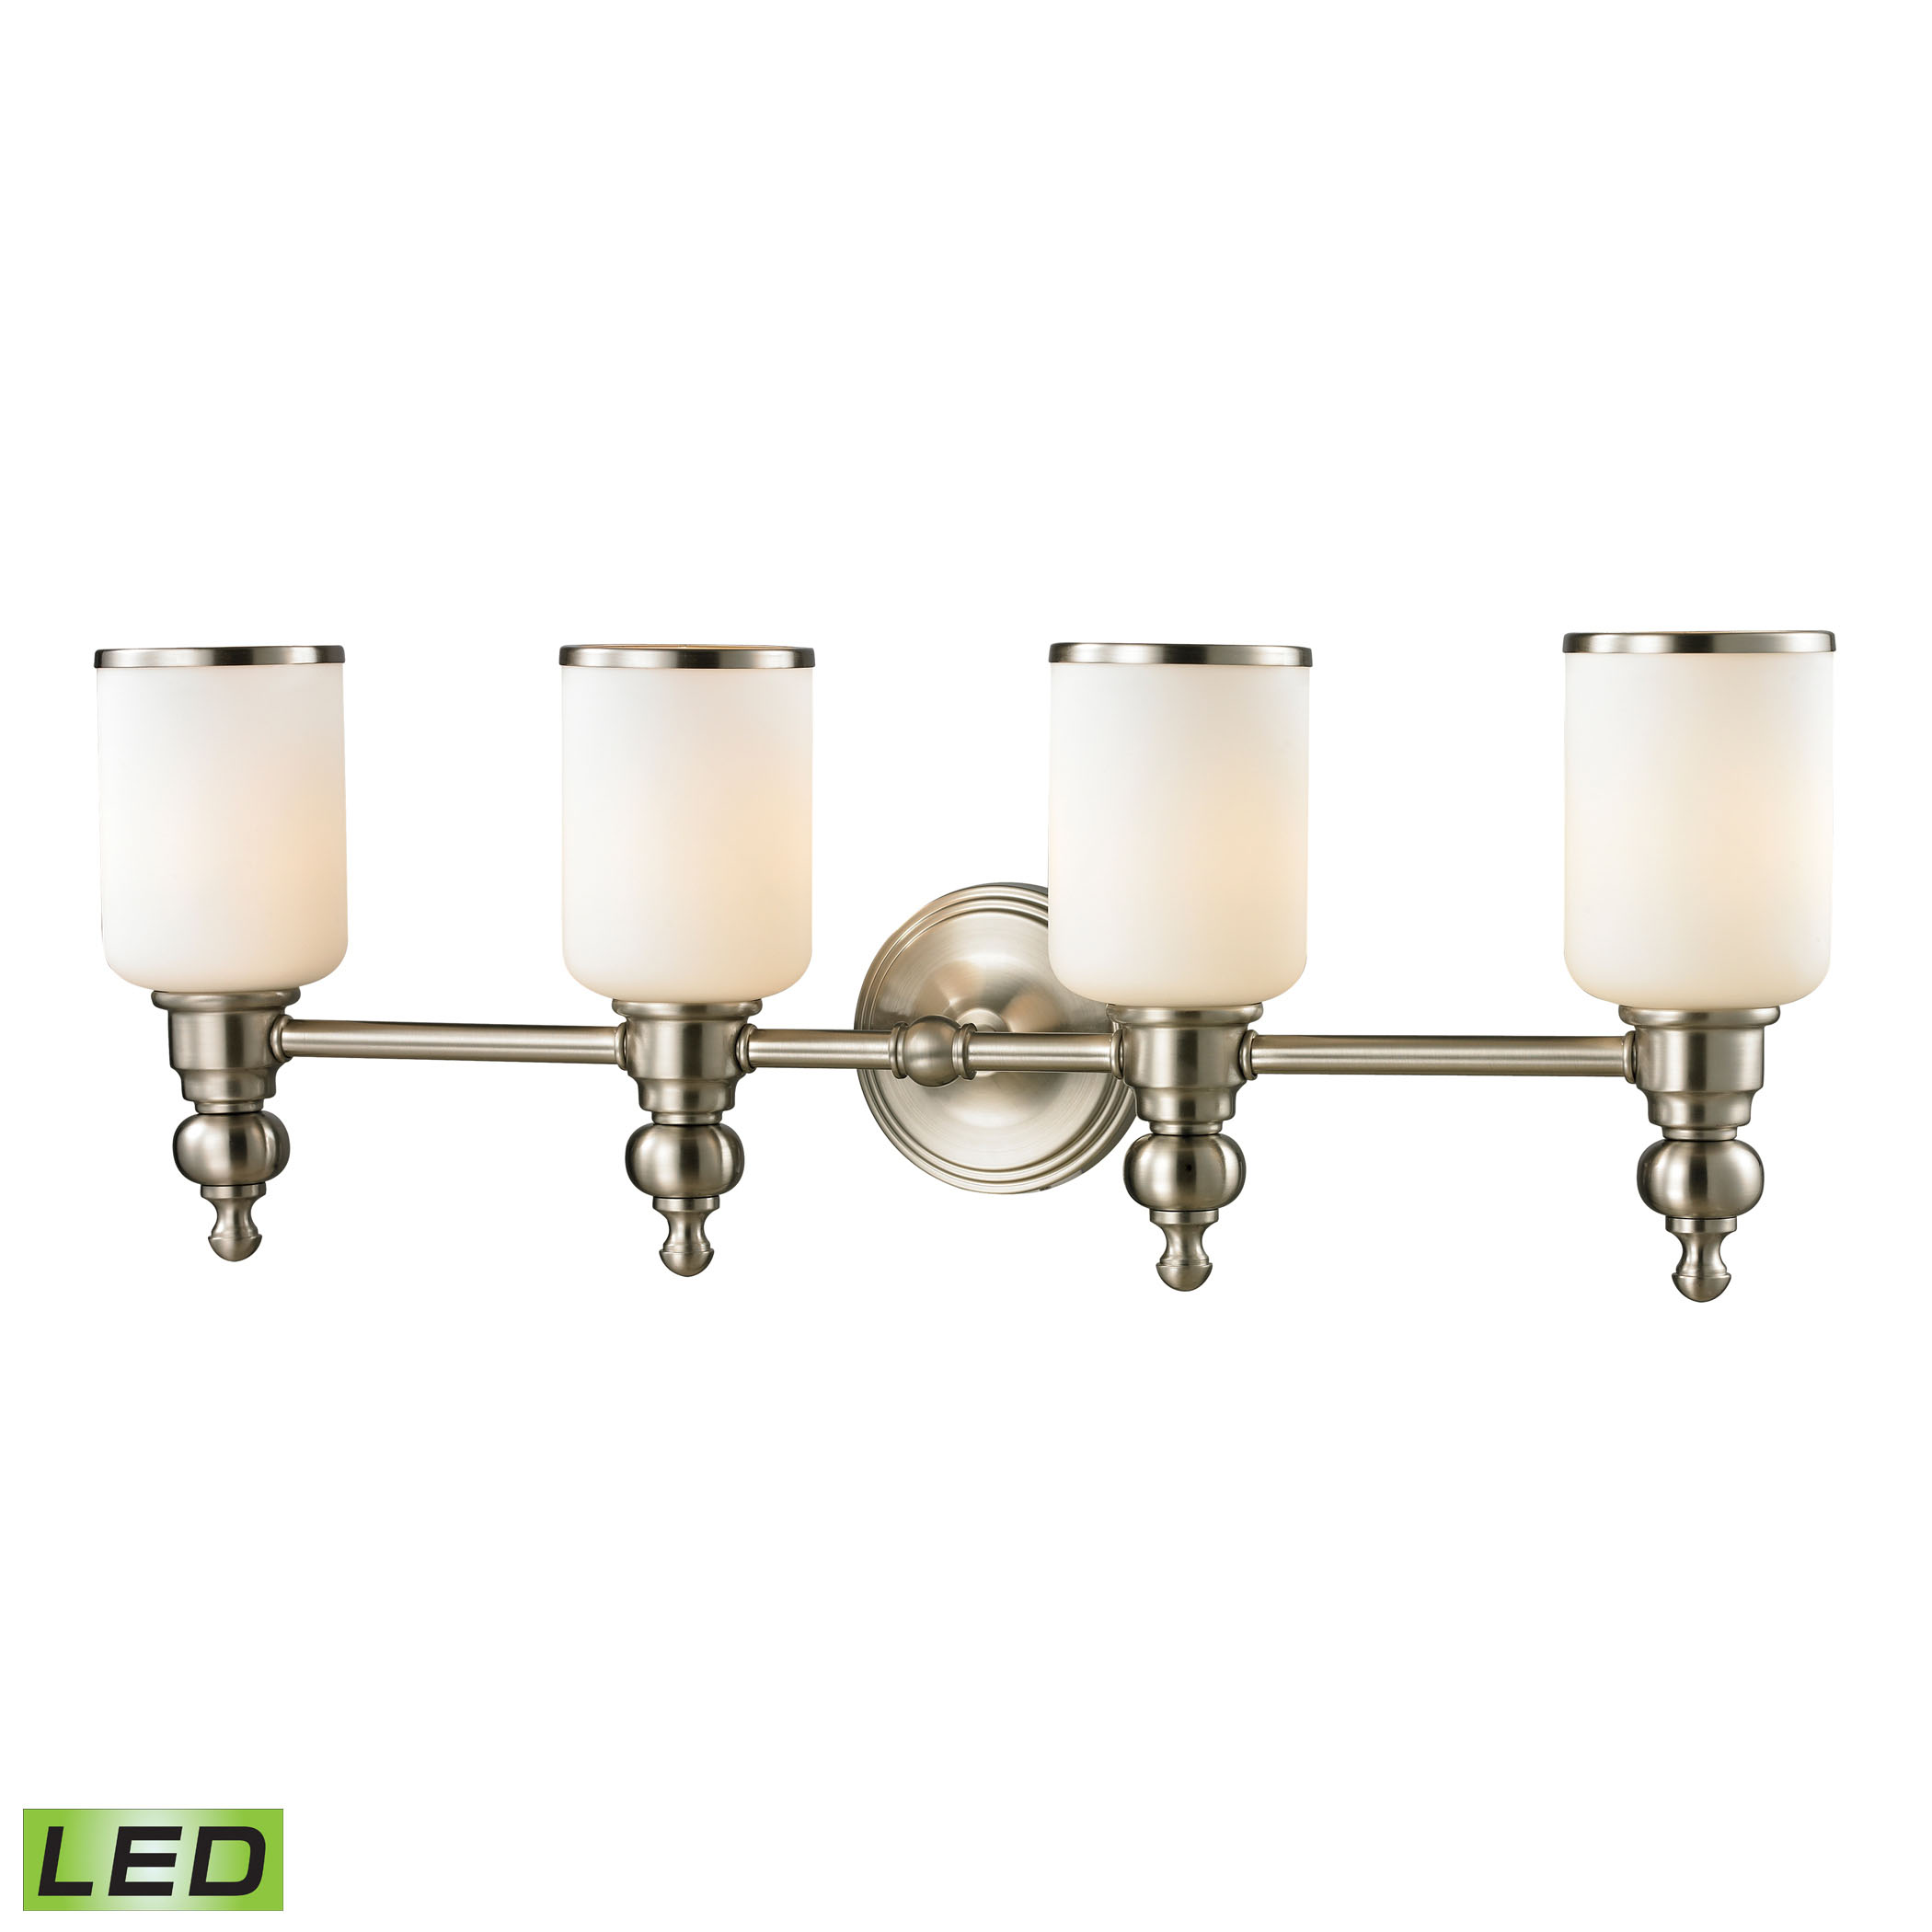 Bristol Collection 4 Light Bath in Brushed Nickel - LED, 800 Lumens (3200 Lumens Total) with Full Sc